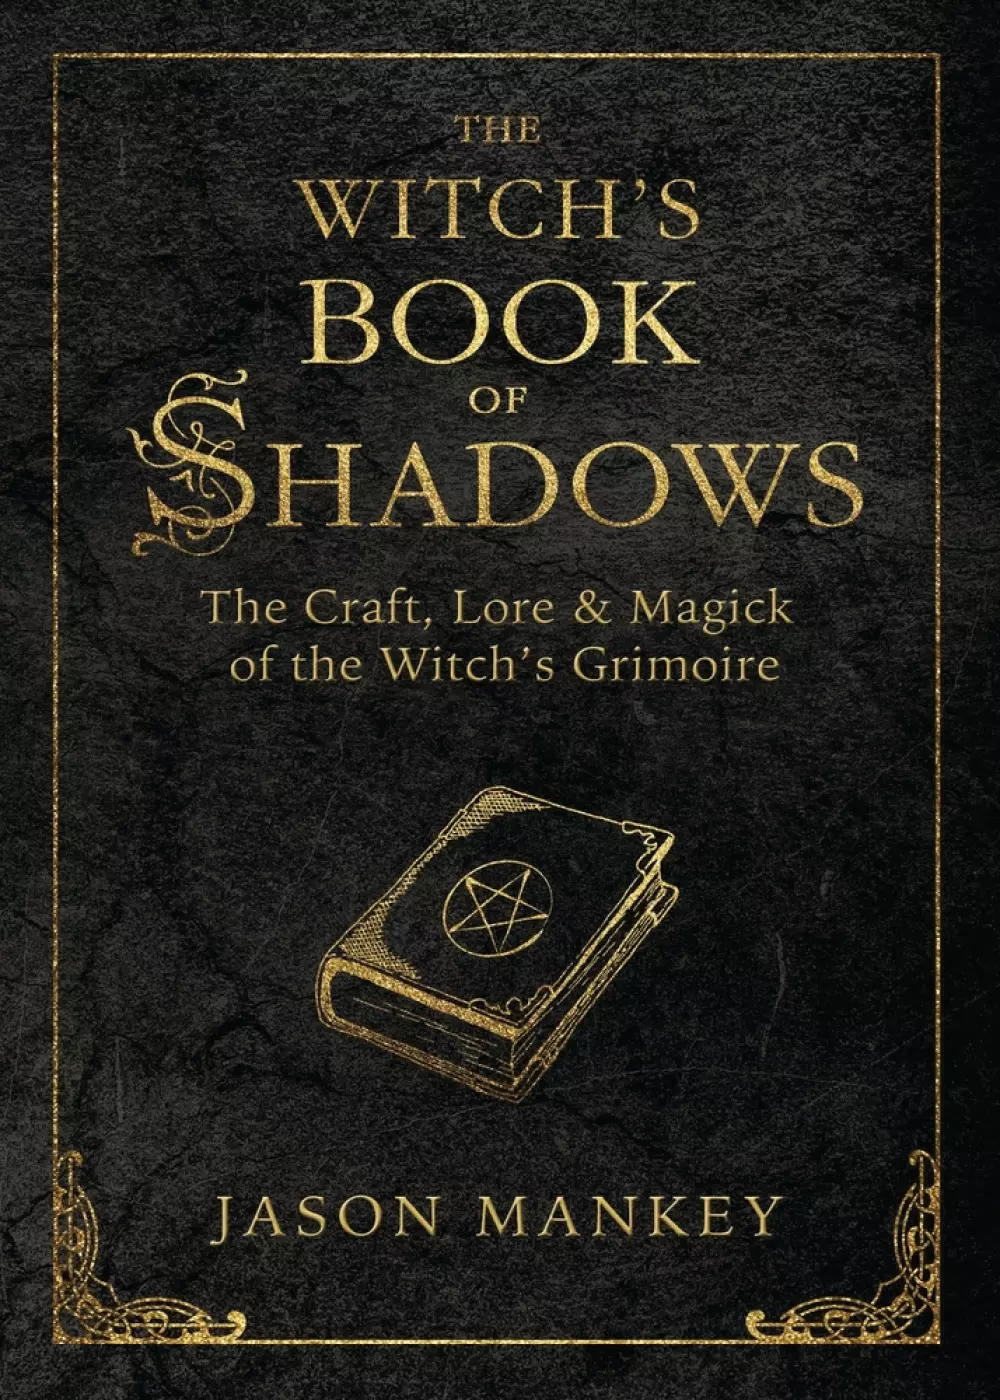 Magick, Wicca, Witchcraft, book of shadows, magic, Grimoire, The Witch's Book of Shadows, 9780738750149, 1950036648, Bøker, Urkulturer,sjamanisme & mystikk, The Craft, Lore & Magick of the Witch's Grimoire